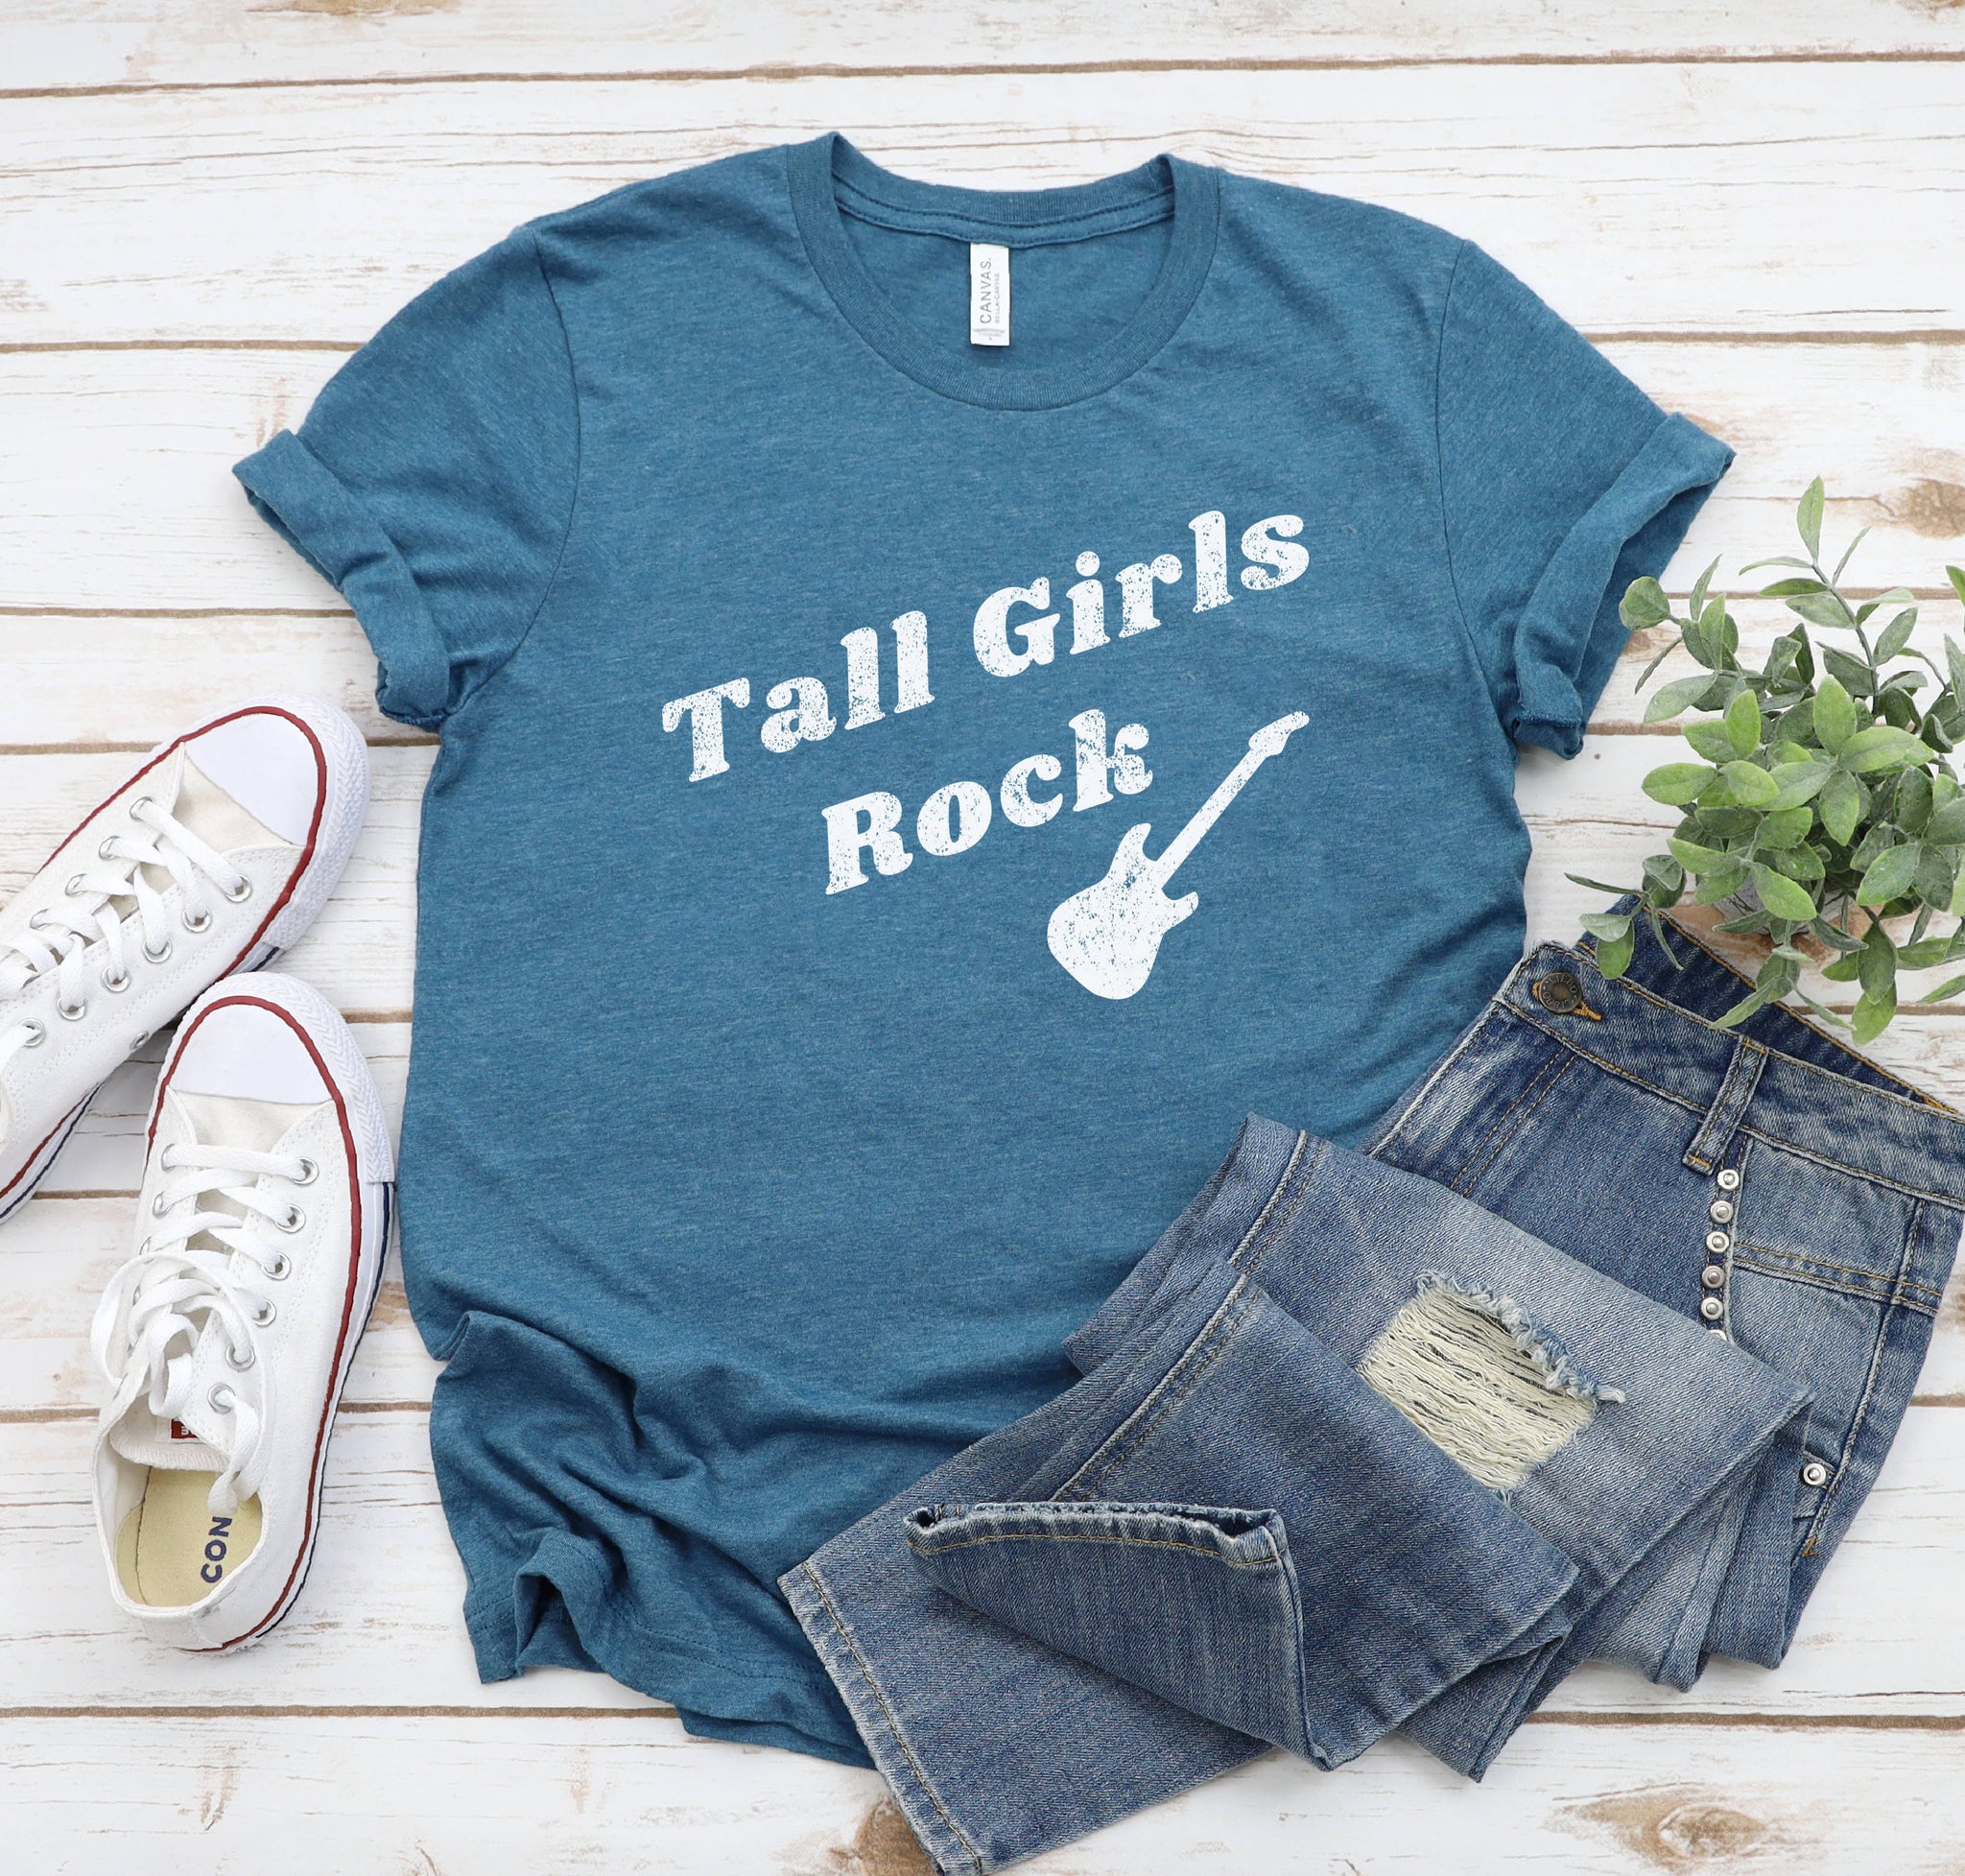 Soft graphic tee for tall women that says "Tall Girls Rock" with a guitar silhouette.